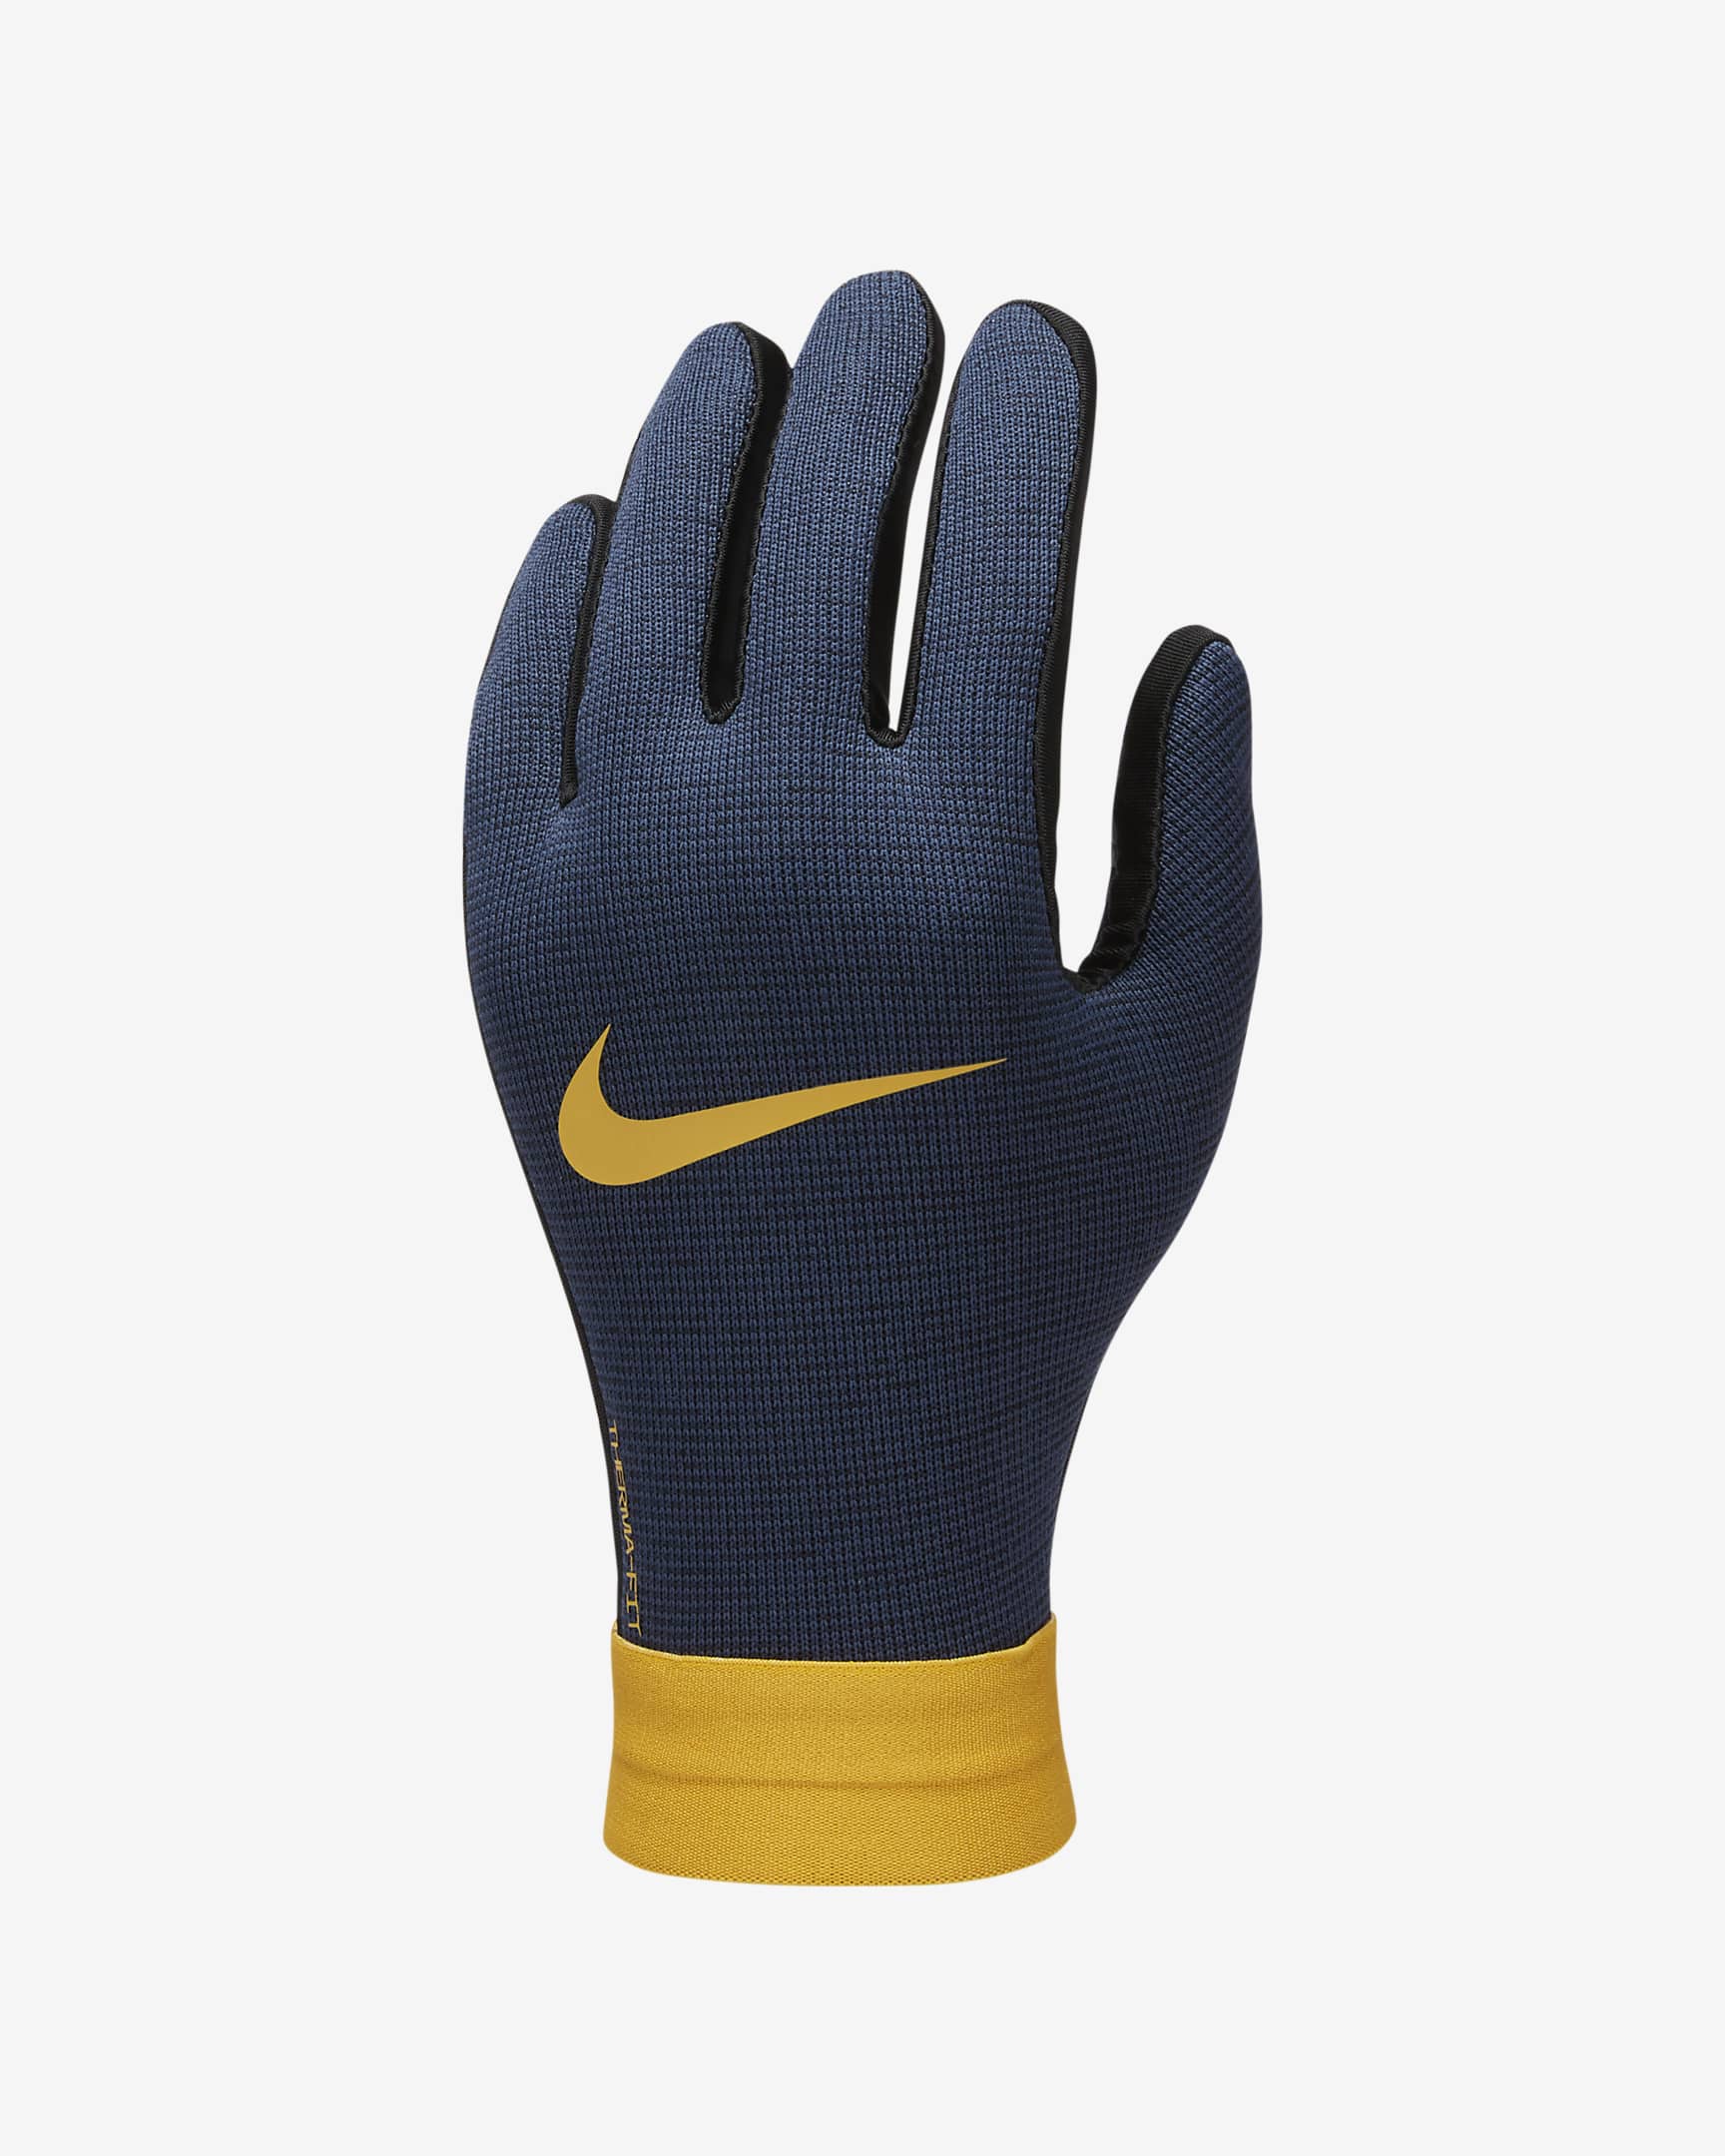 F.C. Barcelona Academy Kids' Nike Therma-FIT Football Gloves - Black/Midnight Navy/Chrome Yellow